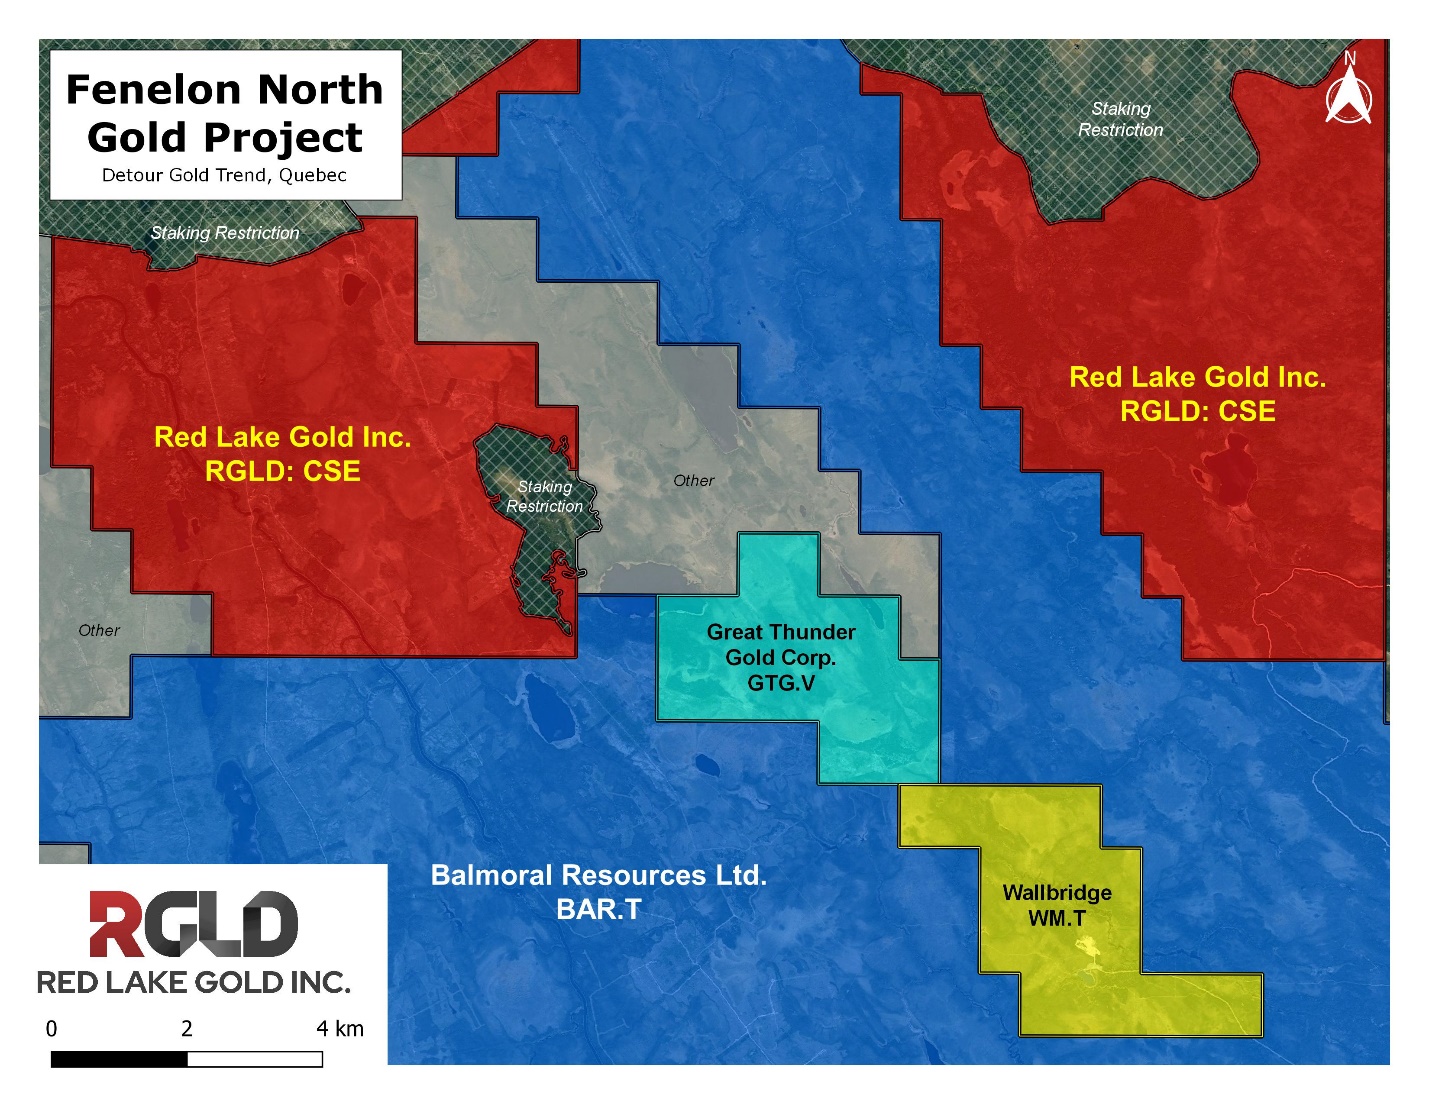 Red Lake Gold Inc., Wednesday, February 12, 2020, Press release picture